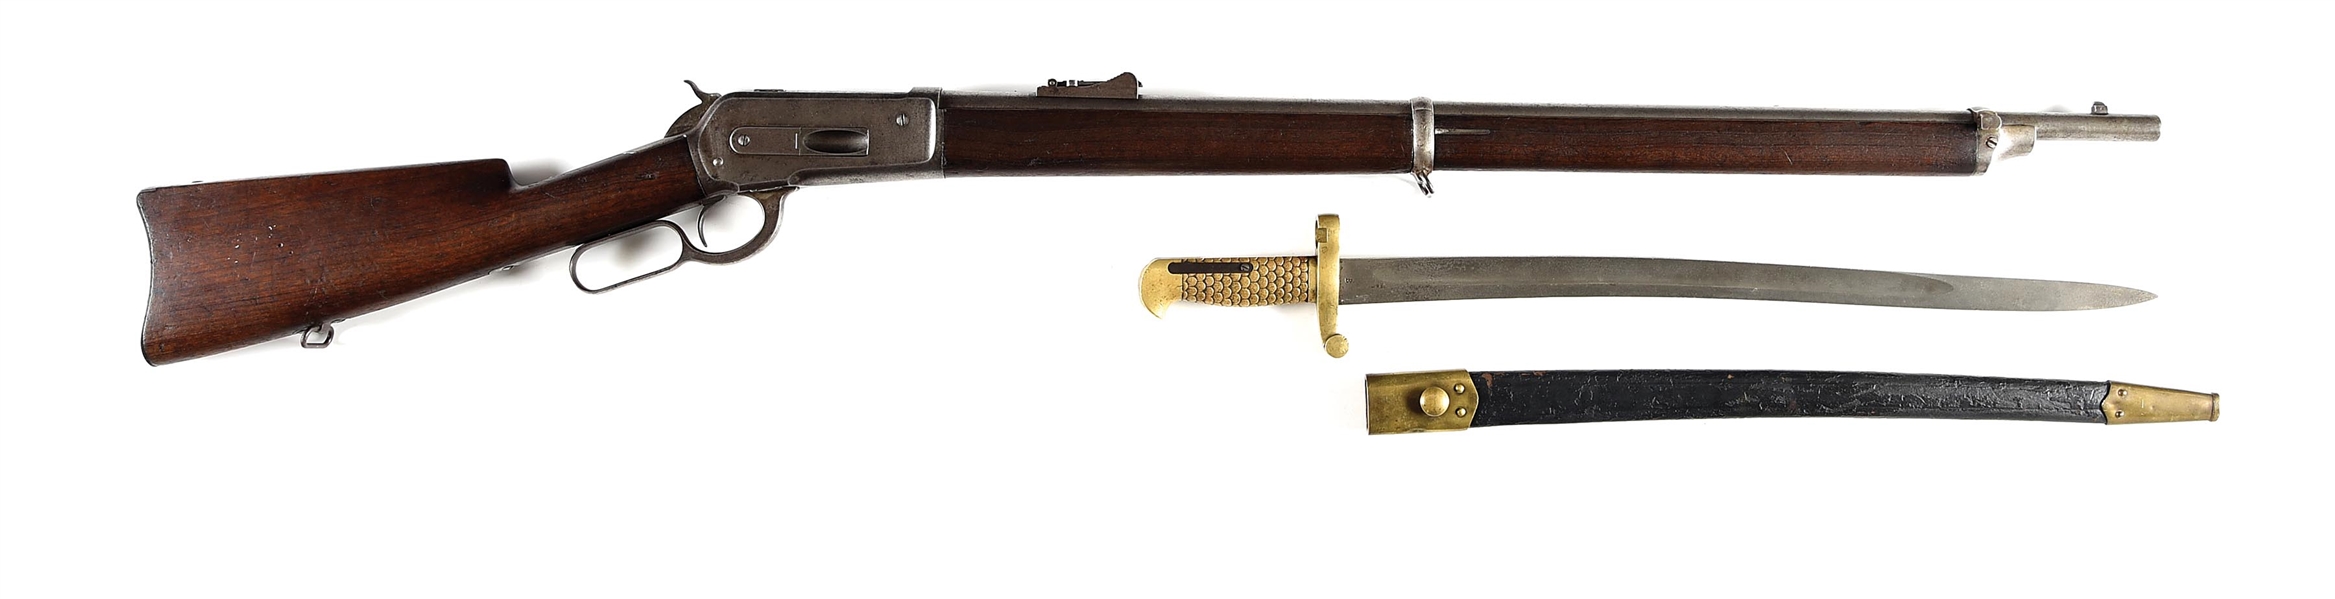 (A) VERY RARE DOCUMENTED WINCHESTER MODEL 1886 LEVER ACTION MUSKET WITH SPECIAL ORDER SABER BAYONET.